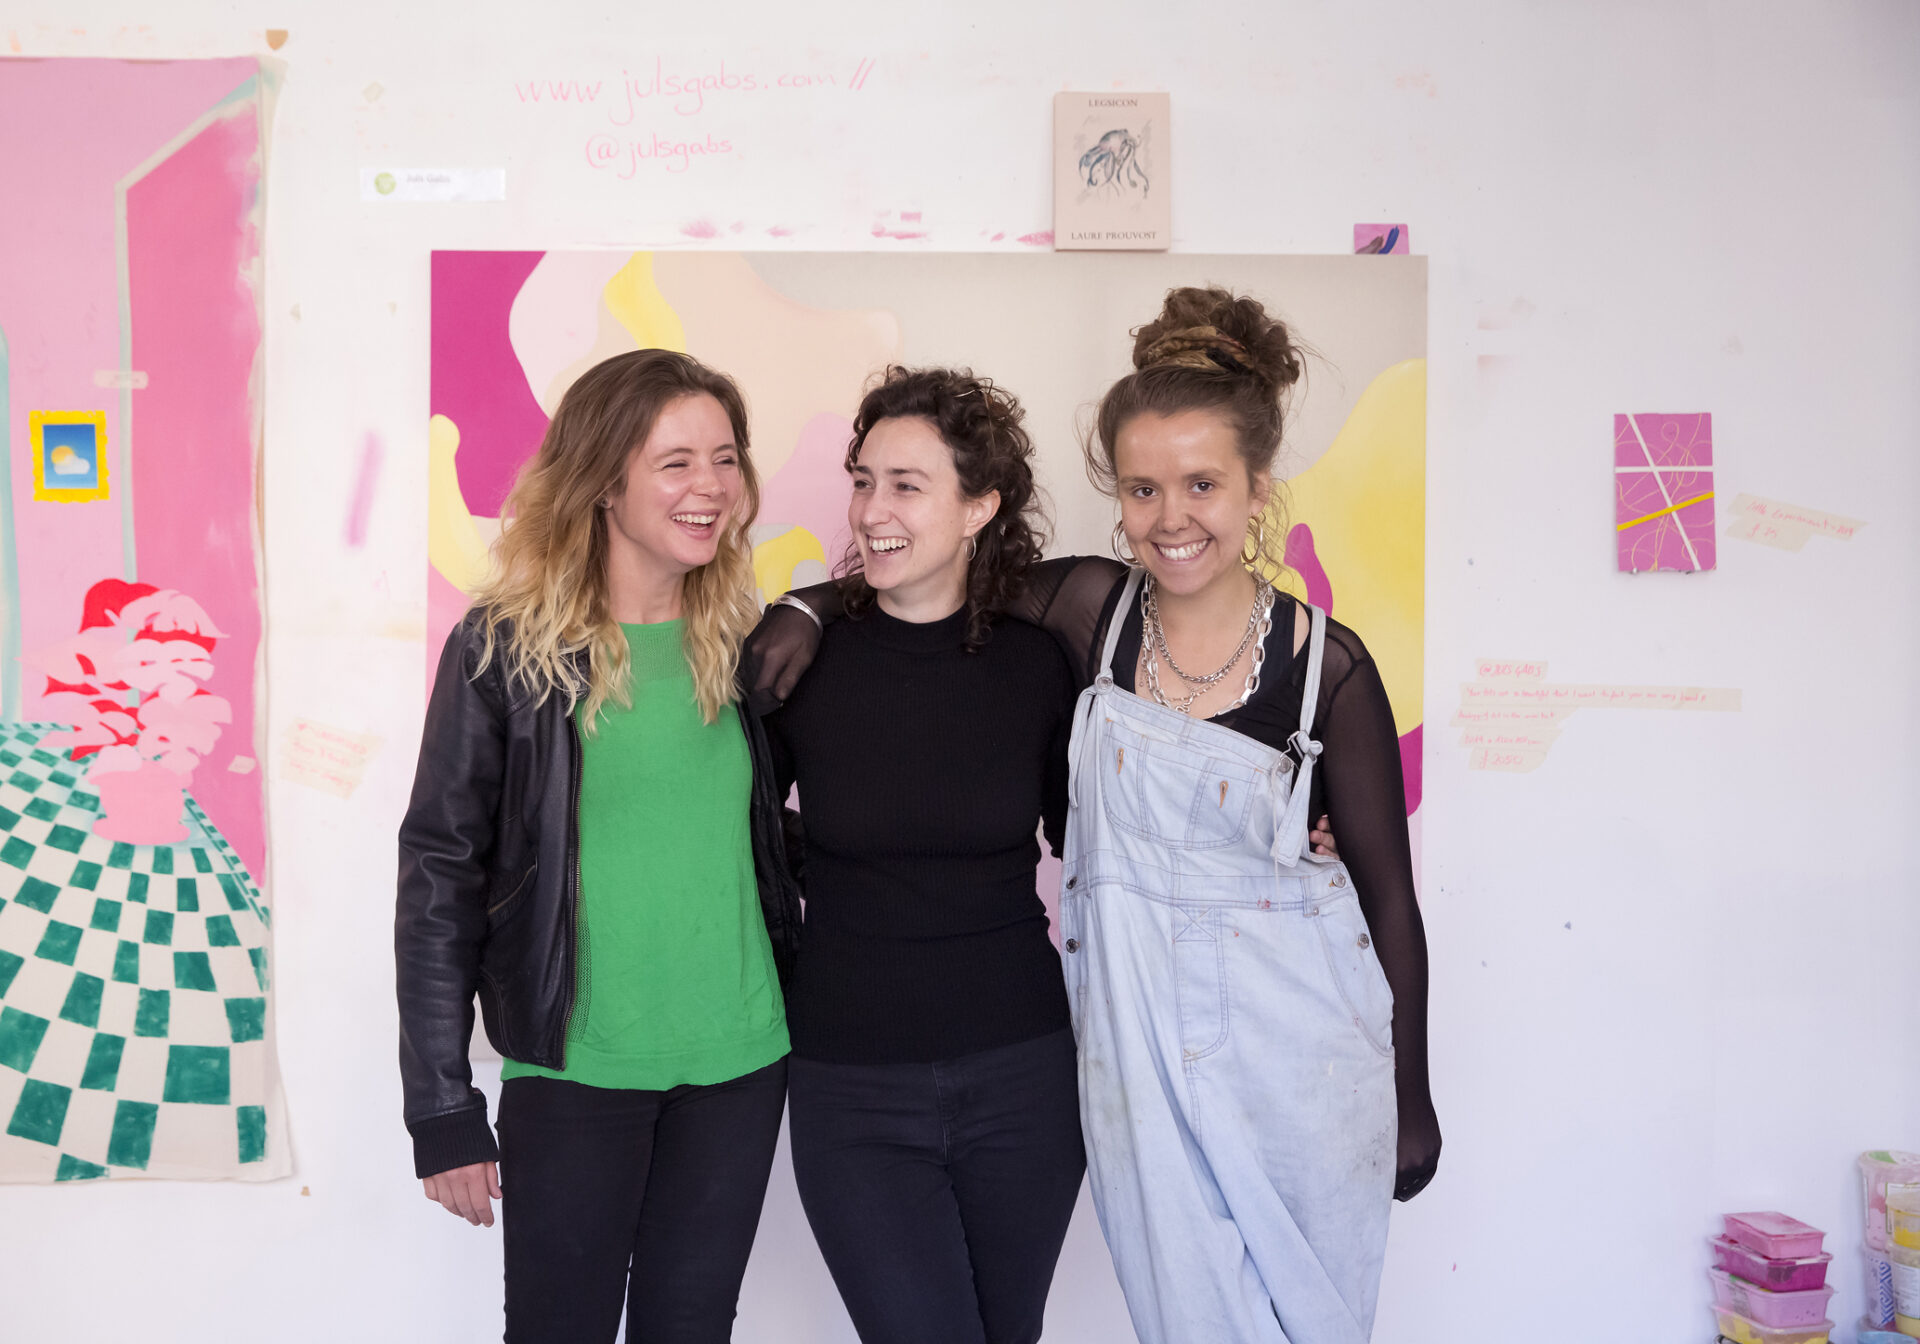 Three people loop arms smiling in a studio with a painting behind them